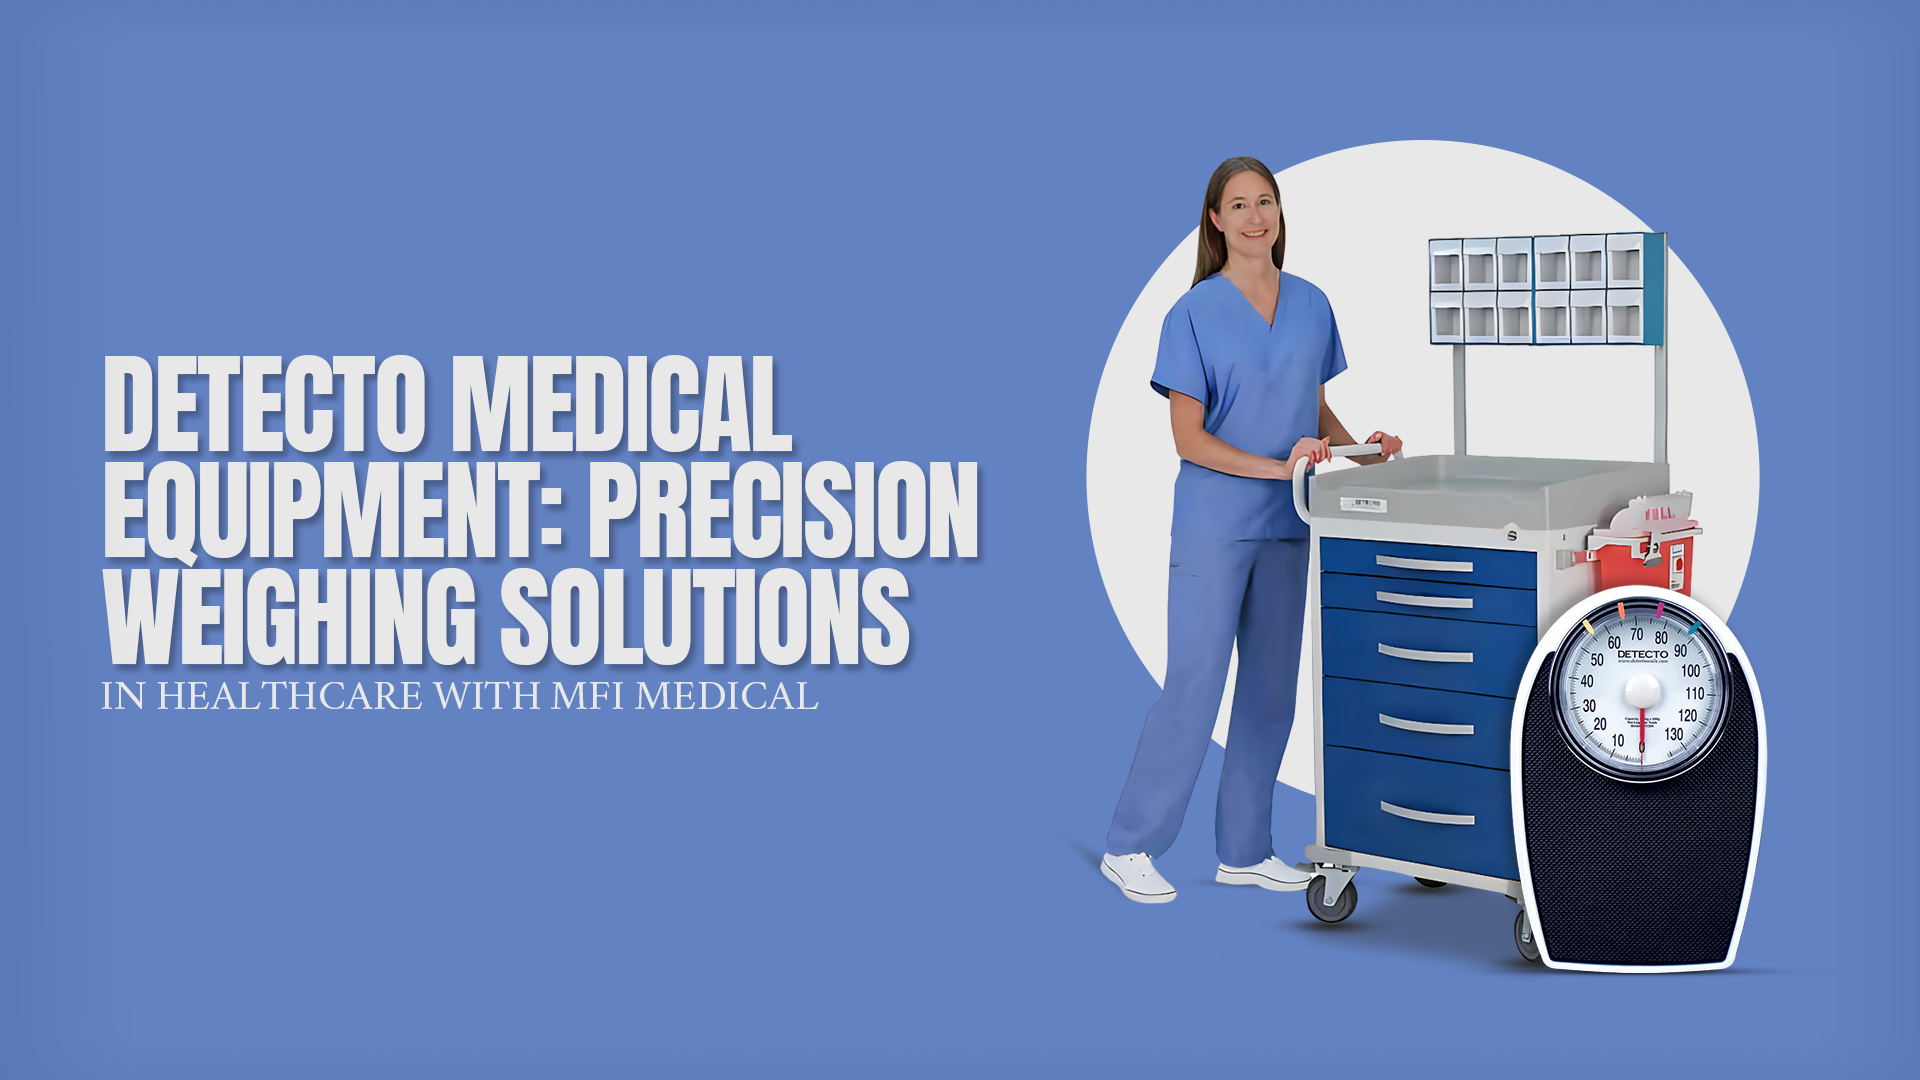 Detecto Medical Equipment: Precision Weighing Solutions in Healthcare with MFI Medical